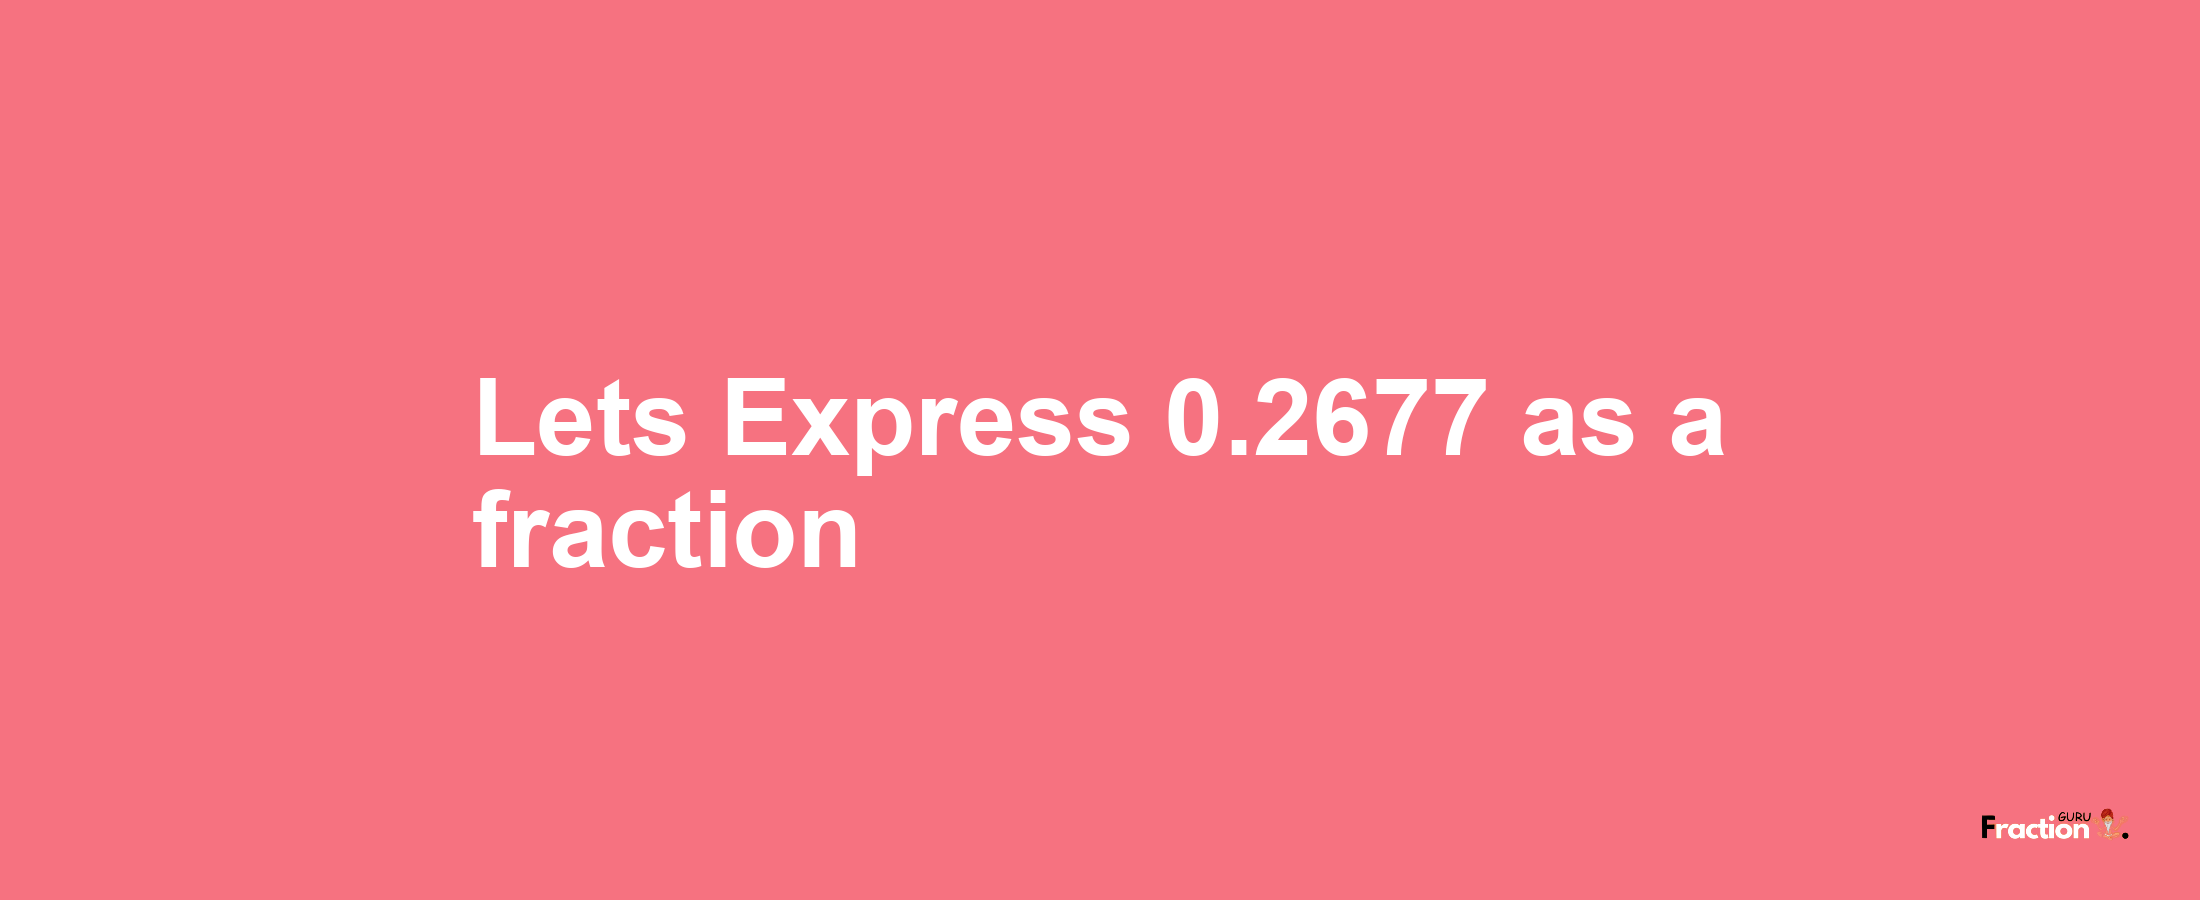 Lets Express 0.2677 as afraction